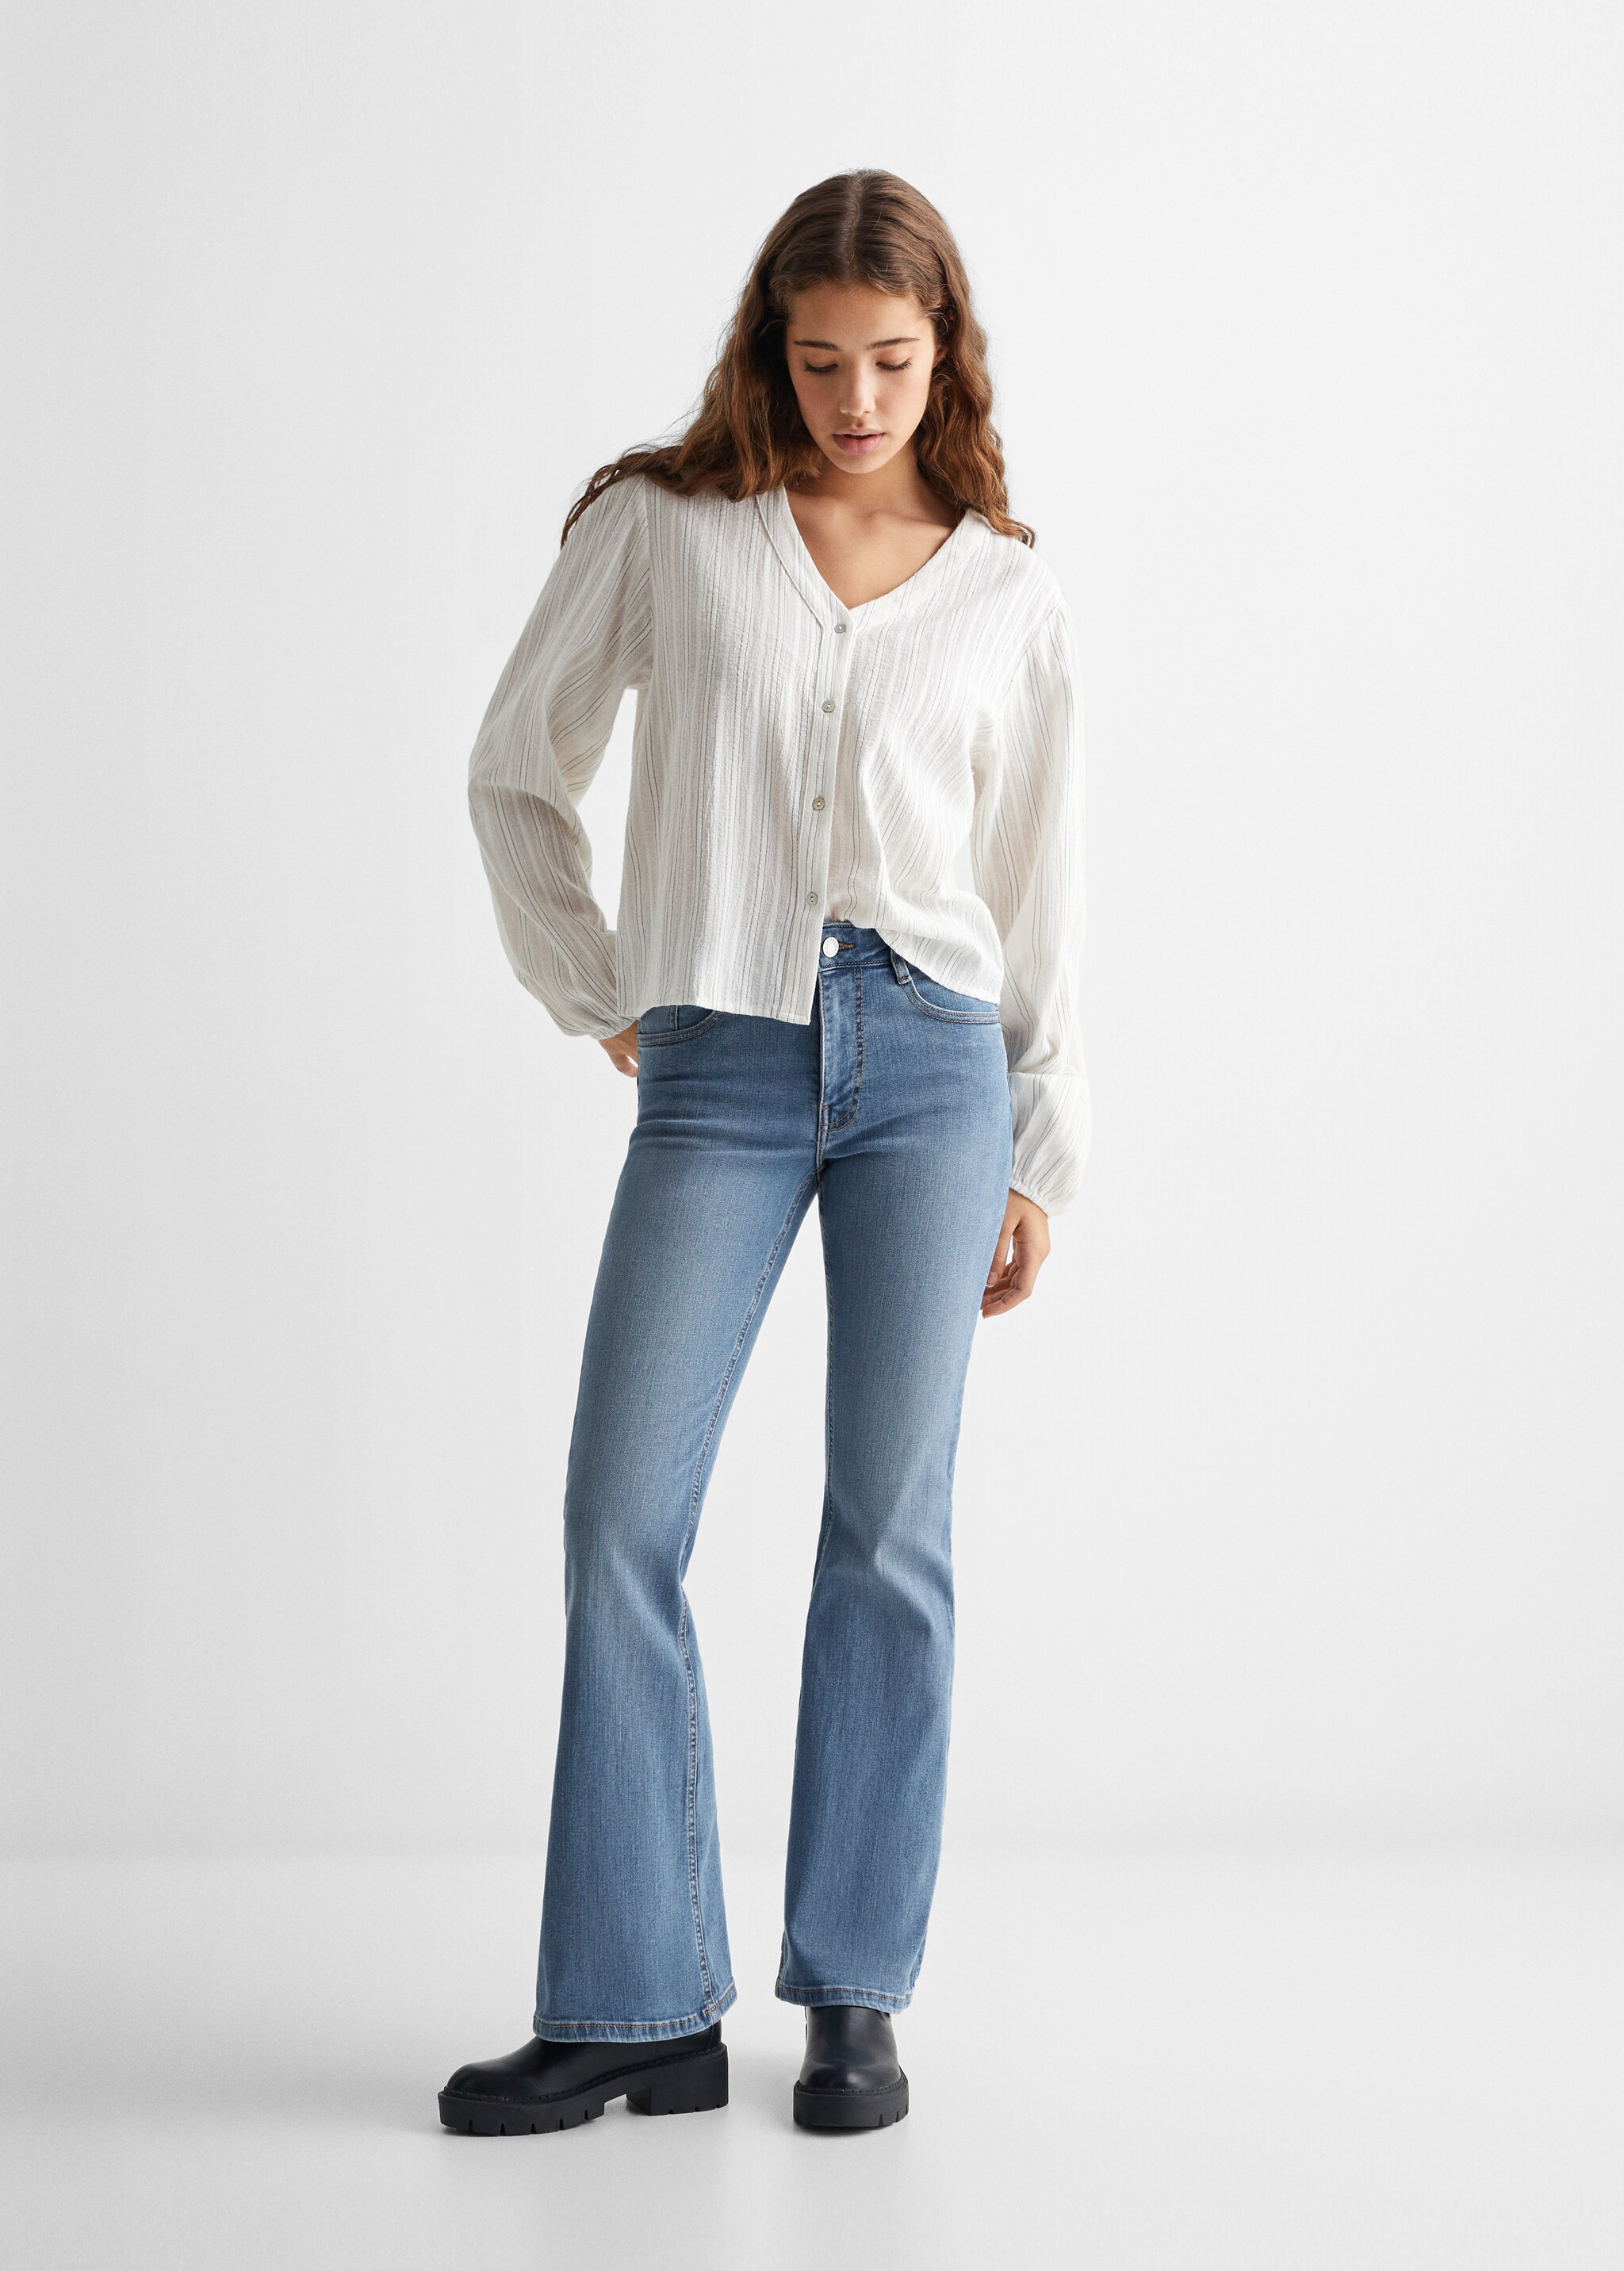 Jeans flare - Plano general